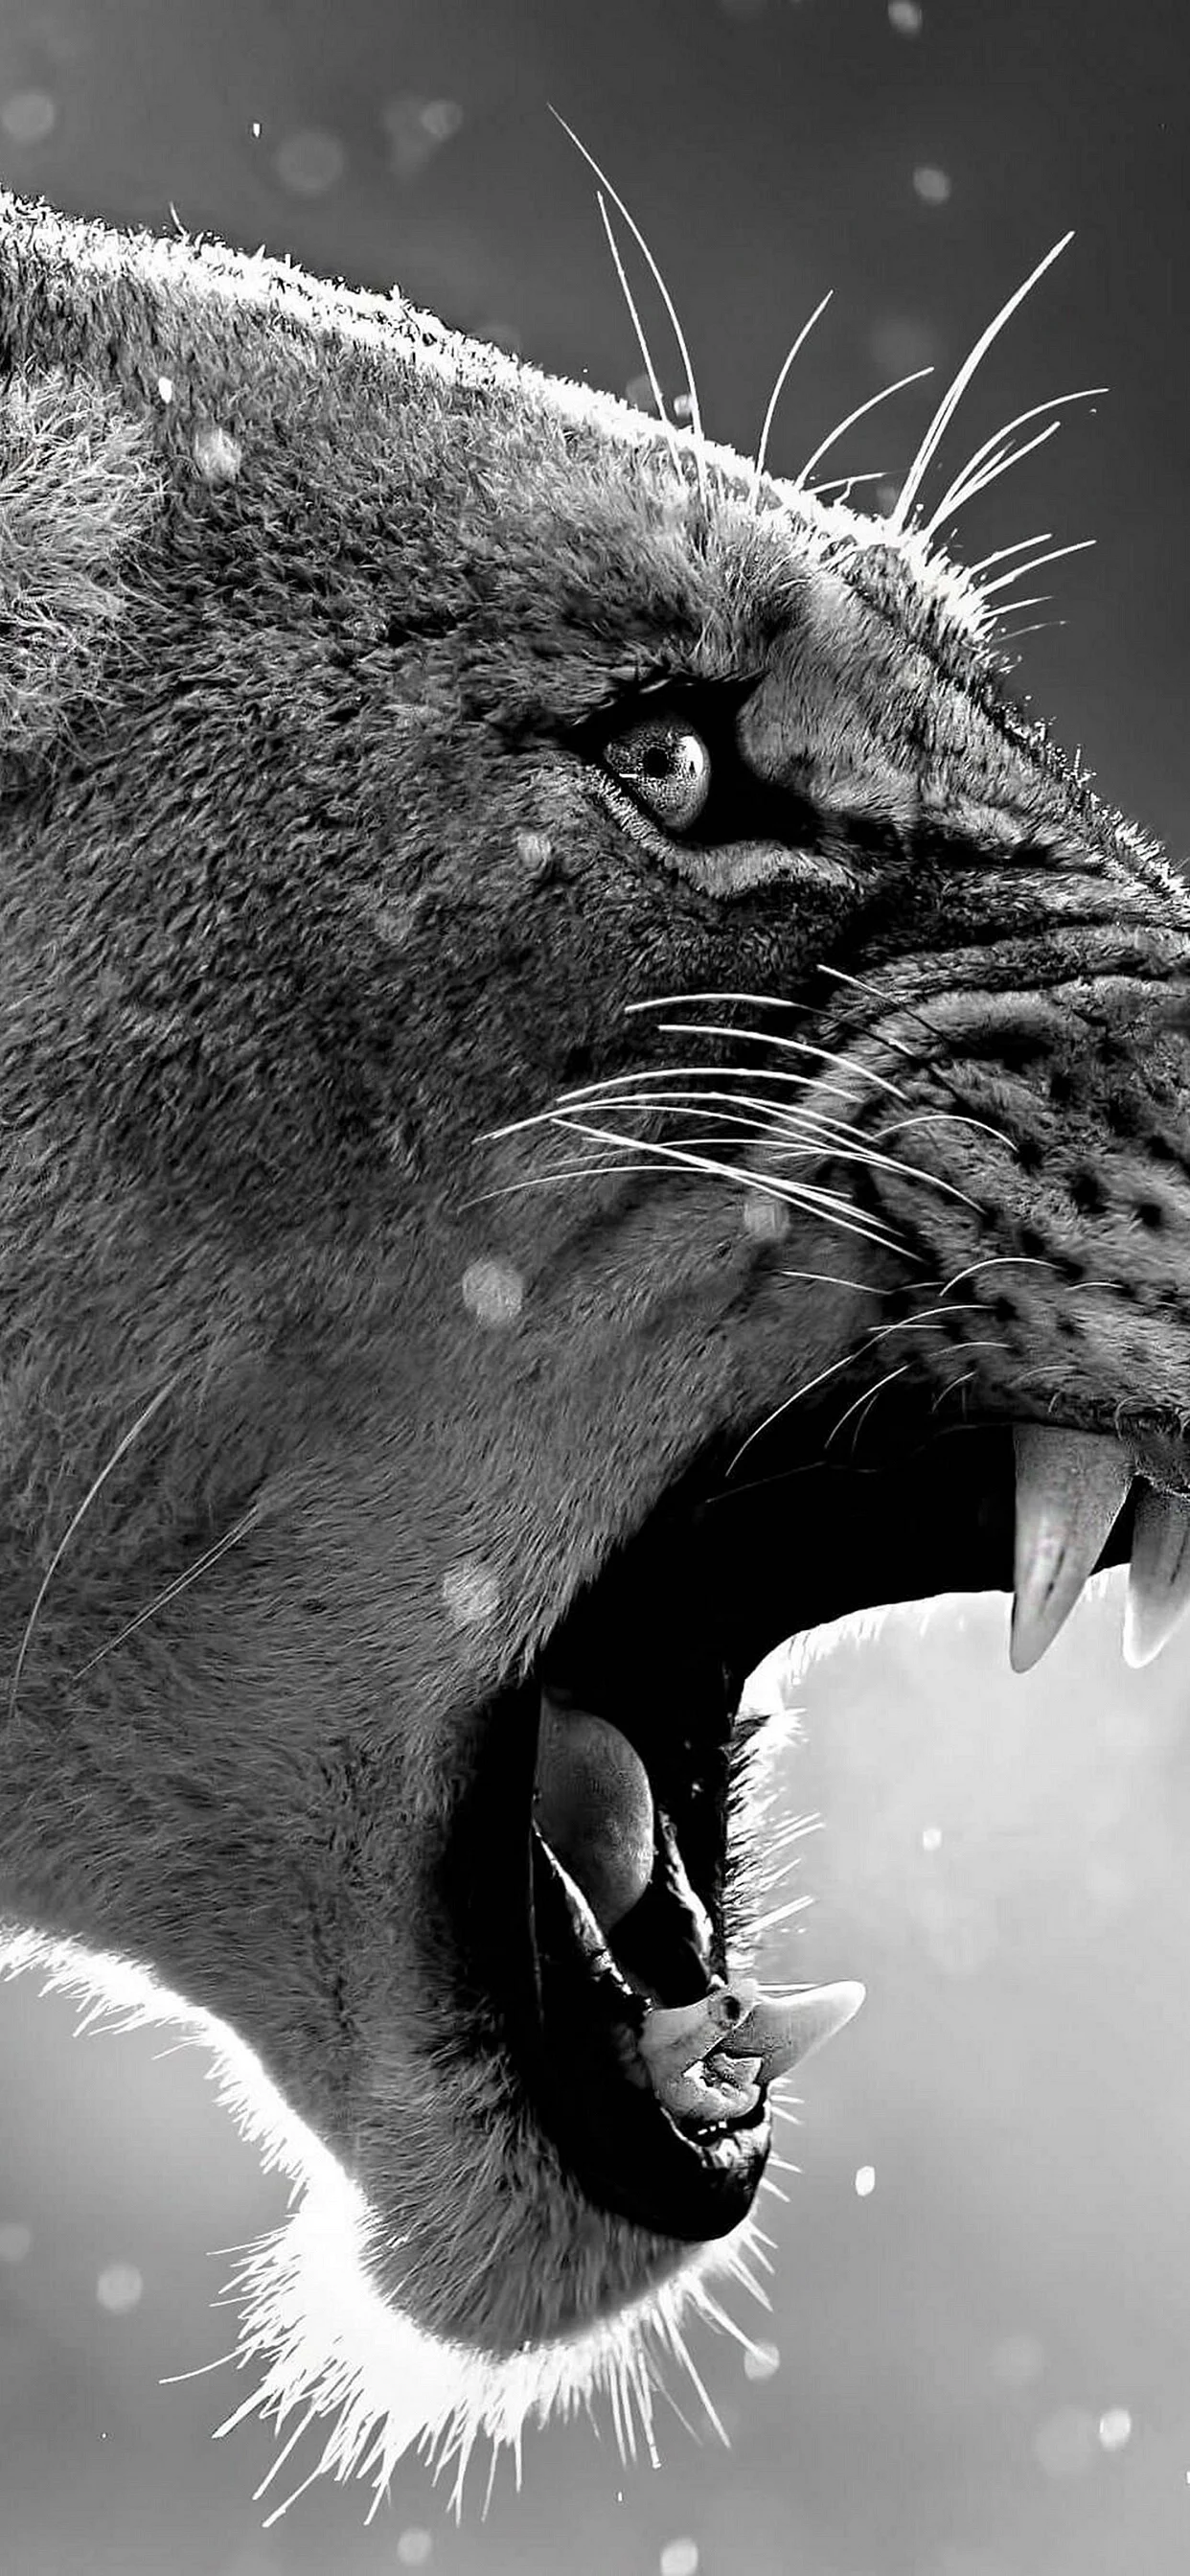 Lion Angry Wallpaper for iPhone 11 Pro Max